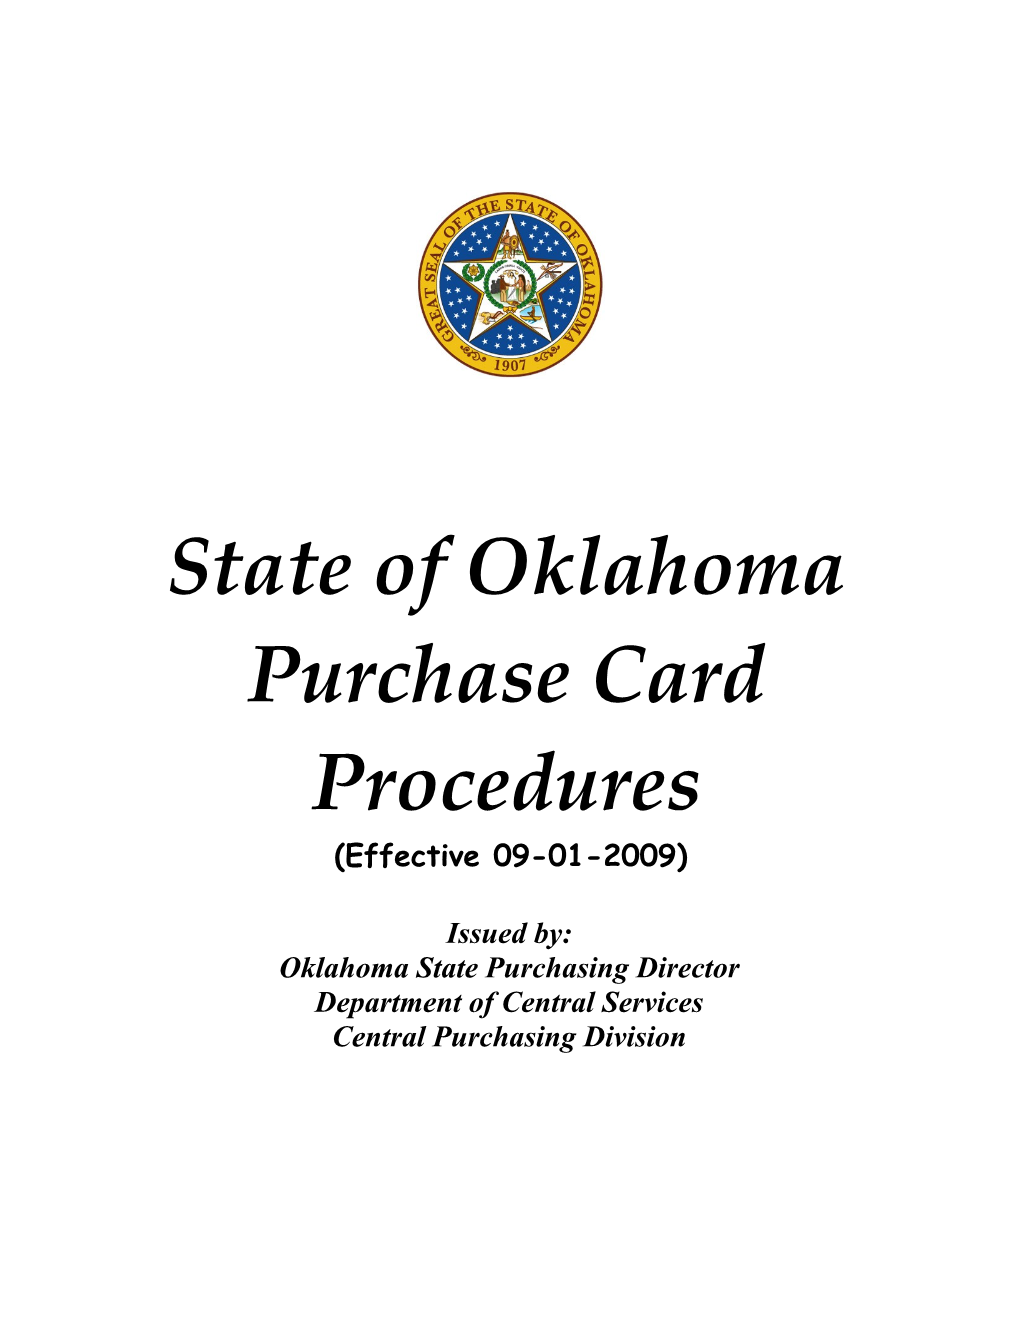 State of Oklahoma Purchase Card Procedures